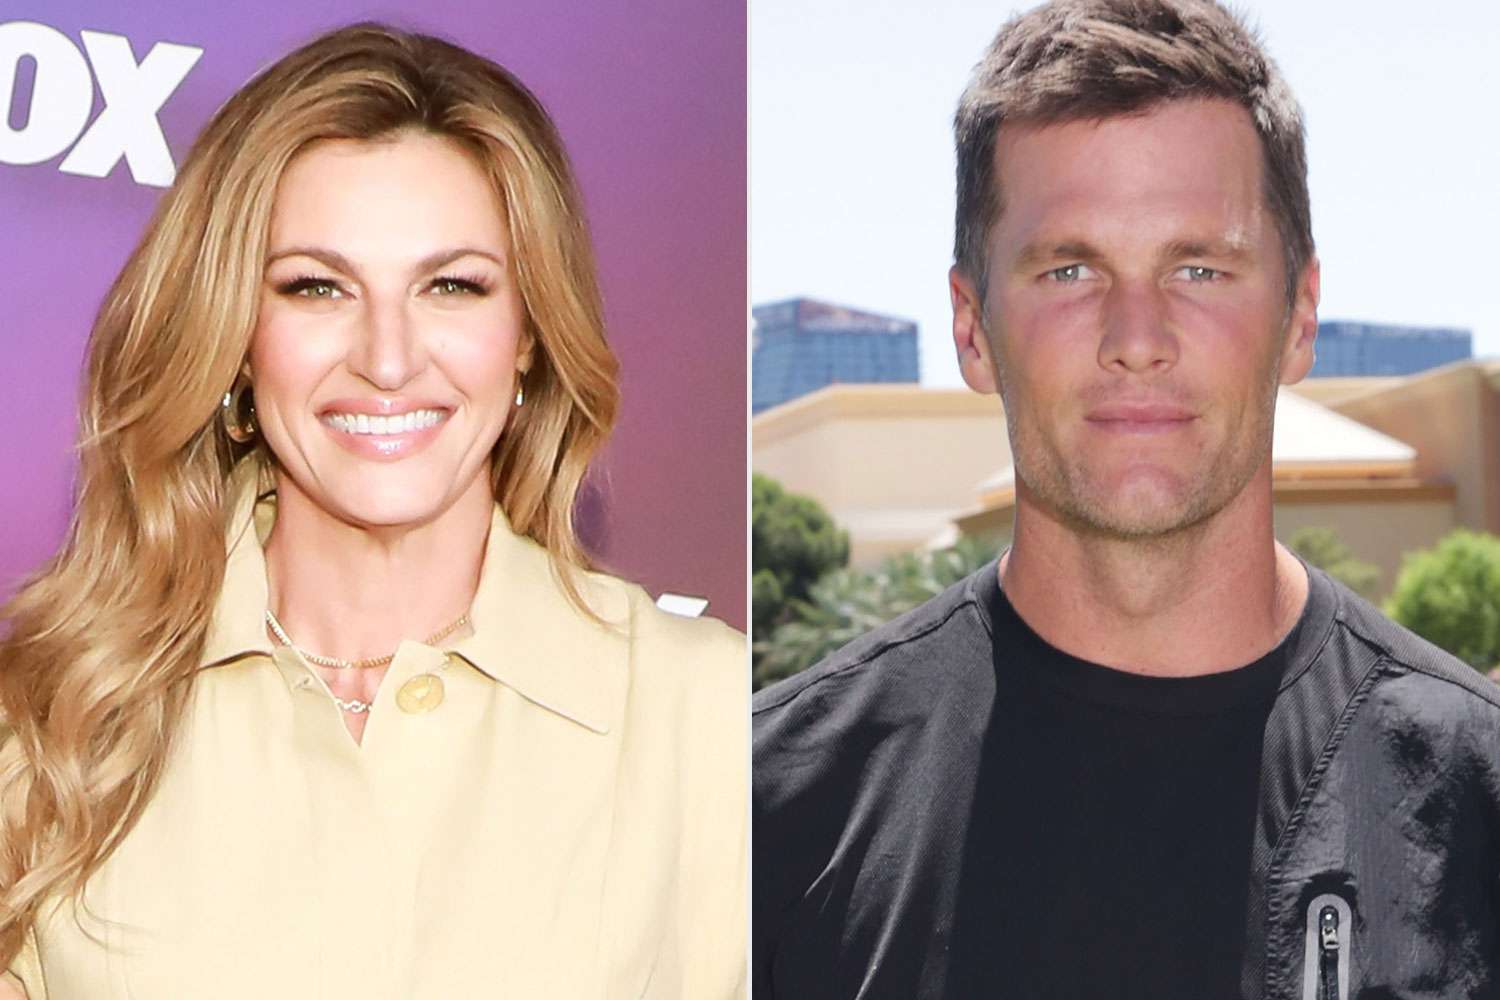 Erin Andrews Says Tom Brady Will Bring 'Stuff We Just Die for' to Fox Sports: 'Love the Inside Information'